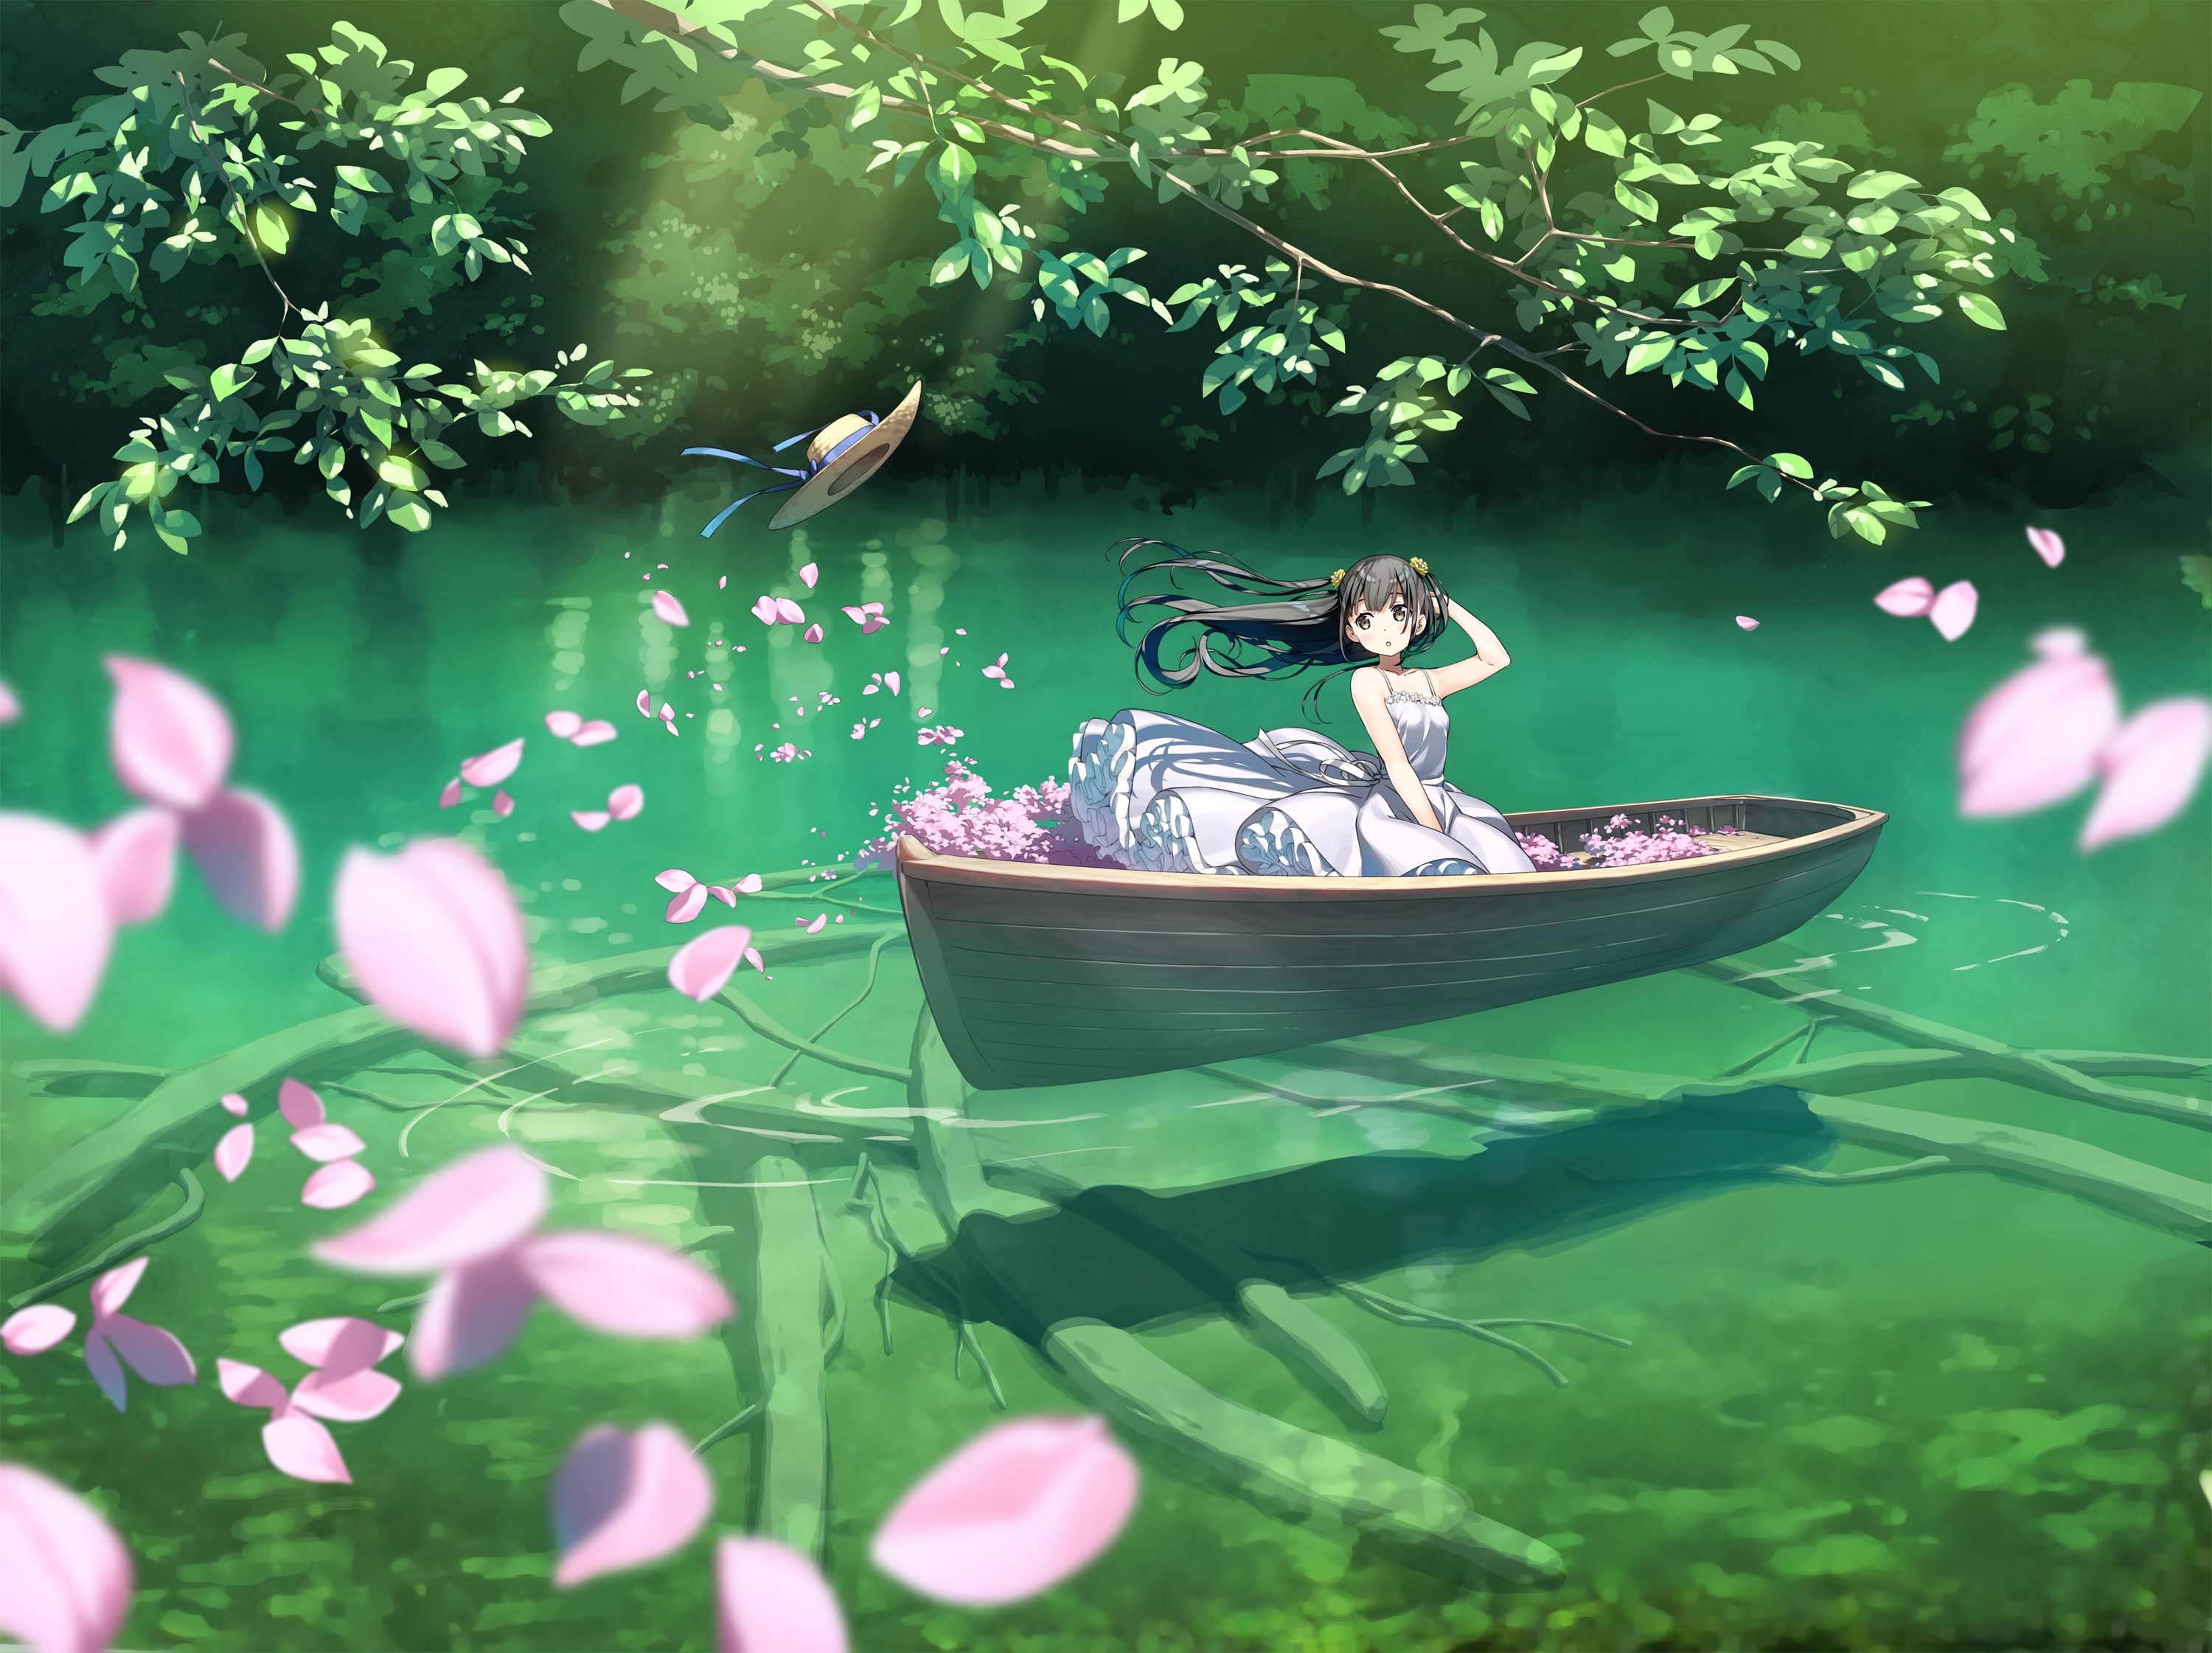 Anime 3000x2242 Kantoku anime girls boat petals hat hair blowing in the wind long hair sun hats water leaves roots branch sitting wind white dress sunlight dress nature ripples